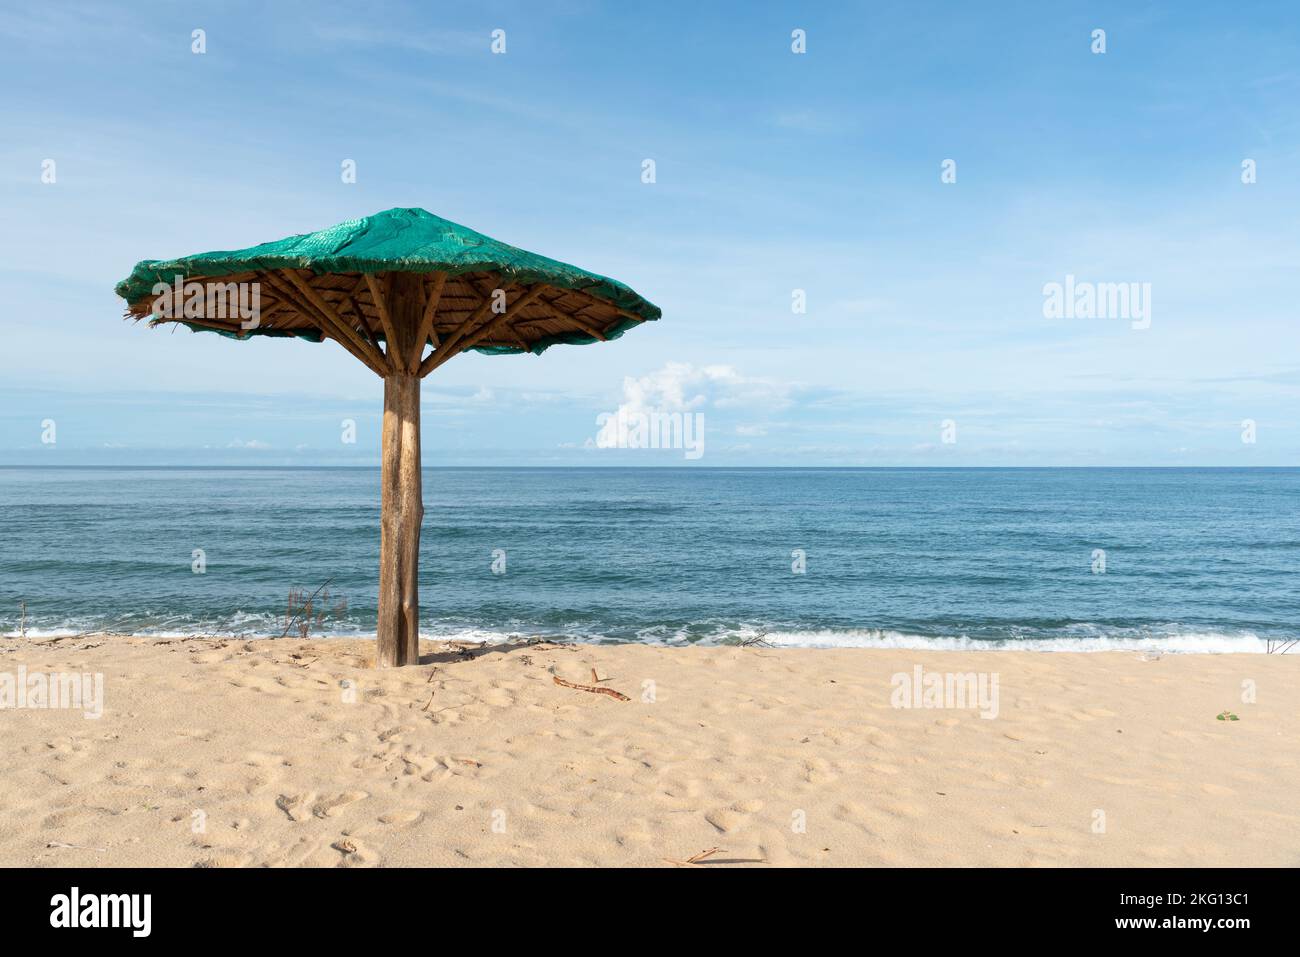 A wooden umbrella on the beach in sunny day. Stock Photo